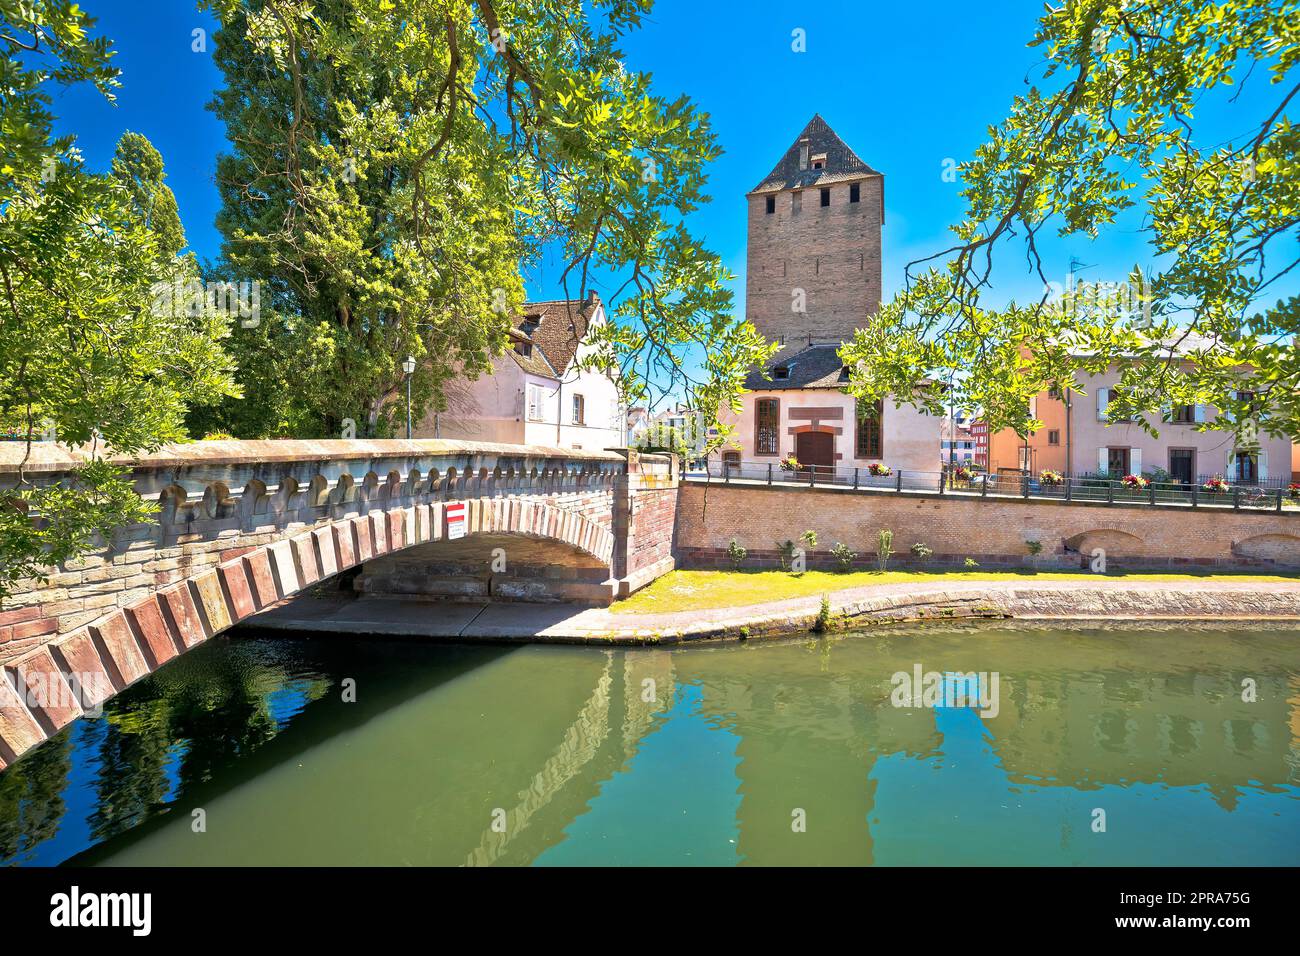 Town of Strasbourg canal and architecture colorful view Stock Photo